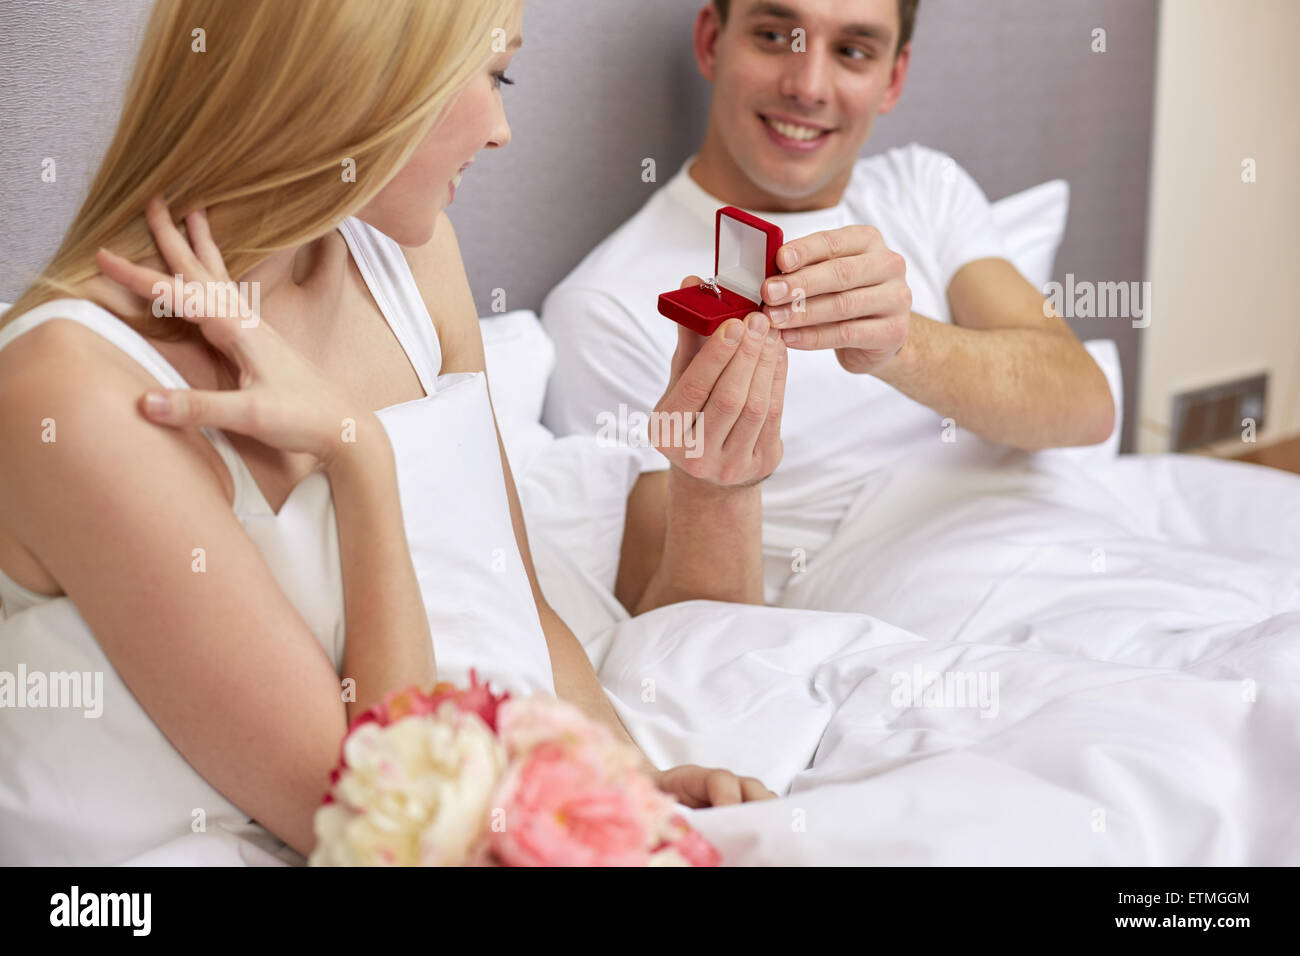 close up of man giving woman engagement ring Stock Photo